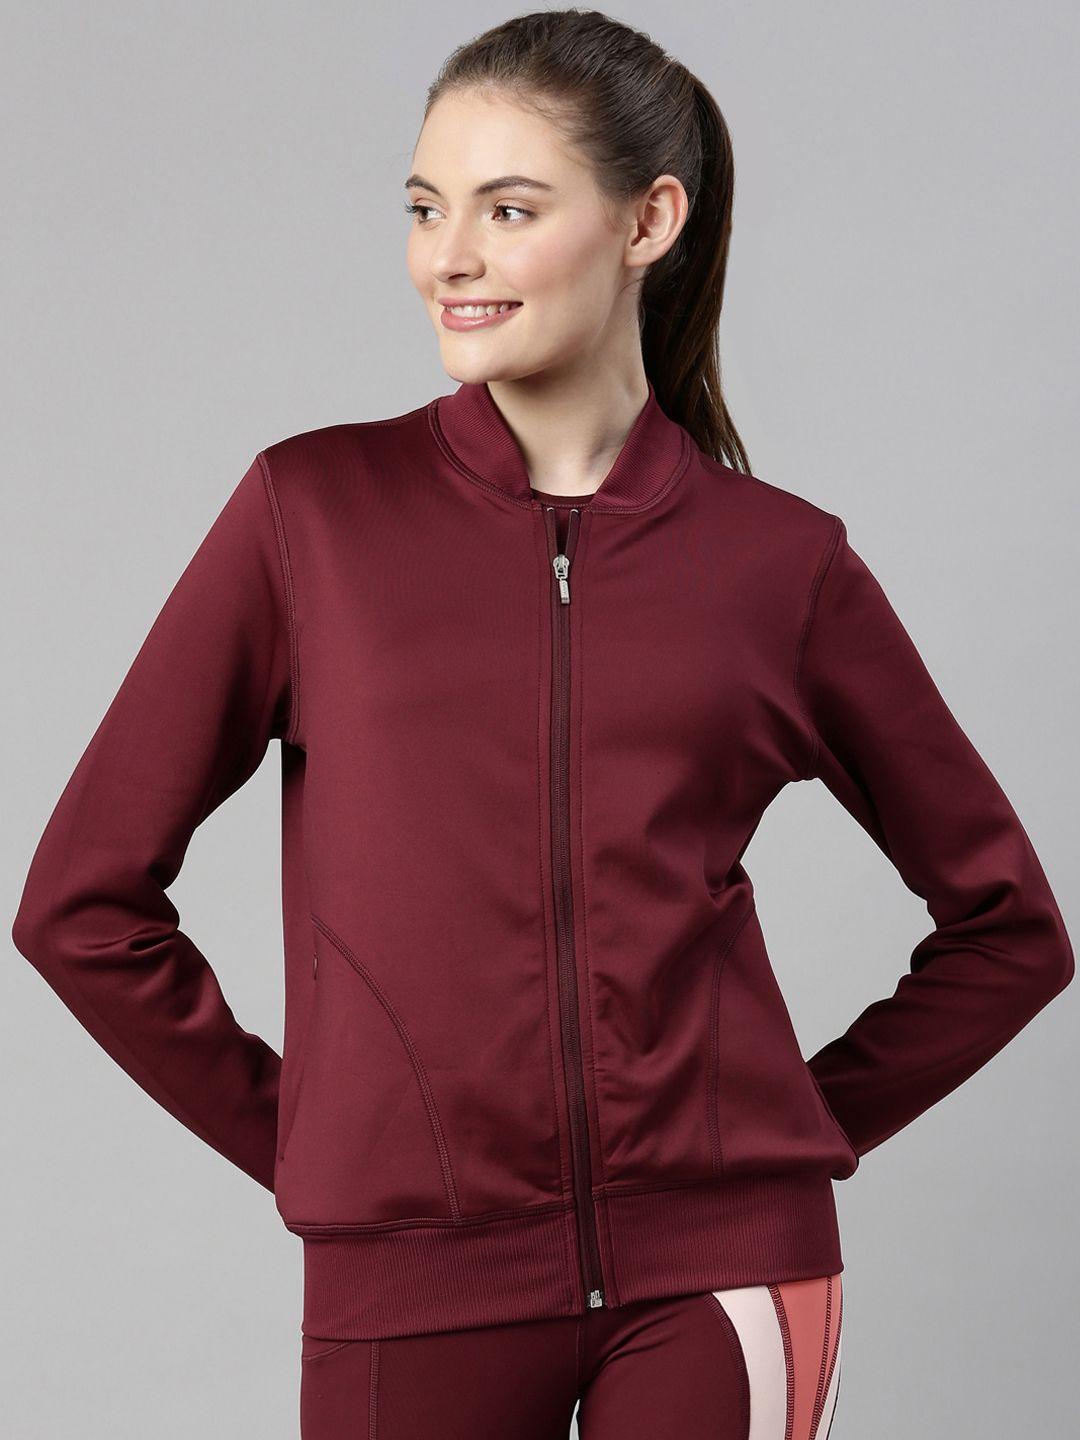 enamor womens athleisure a901-dry fit full sleeve bomber scuba jacket with zipper pockets